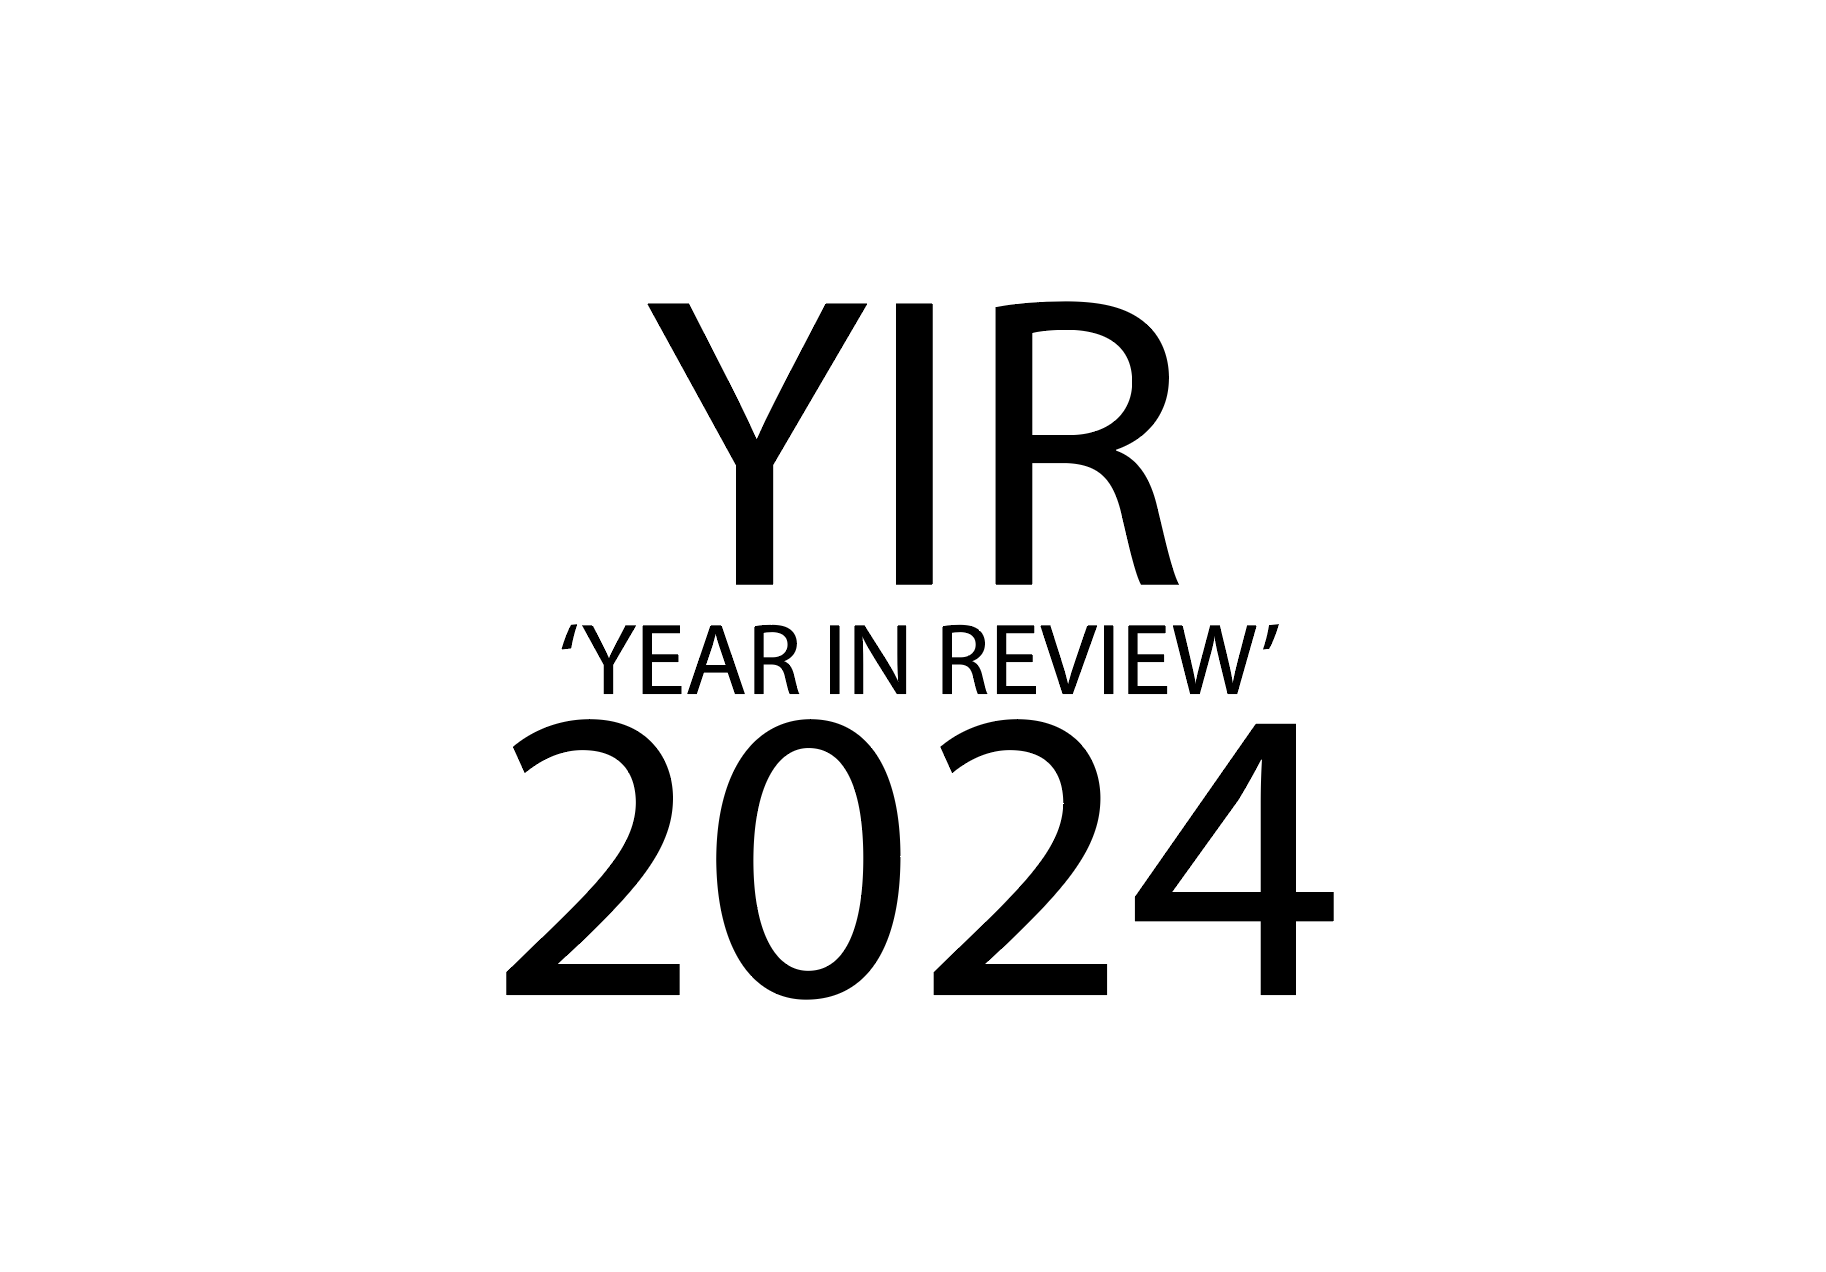 YEAR IN REVIEW 2024